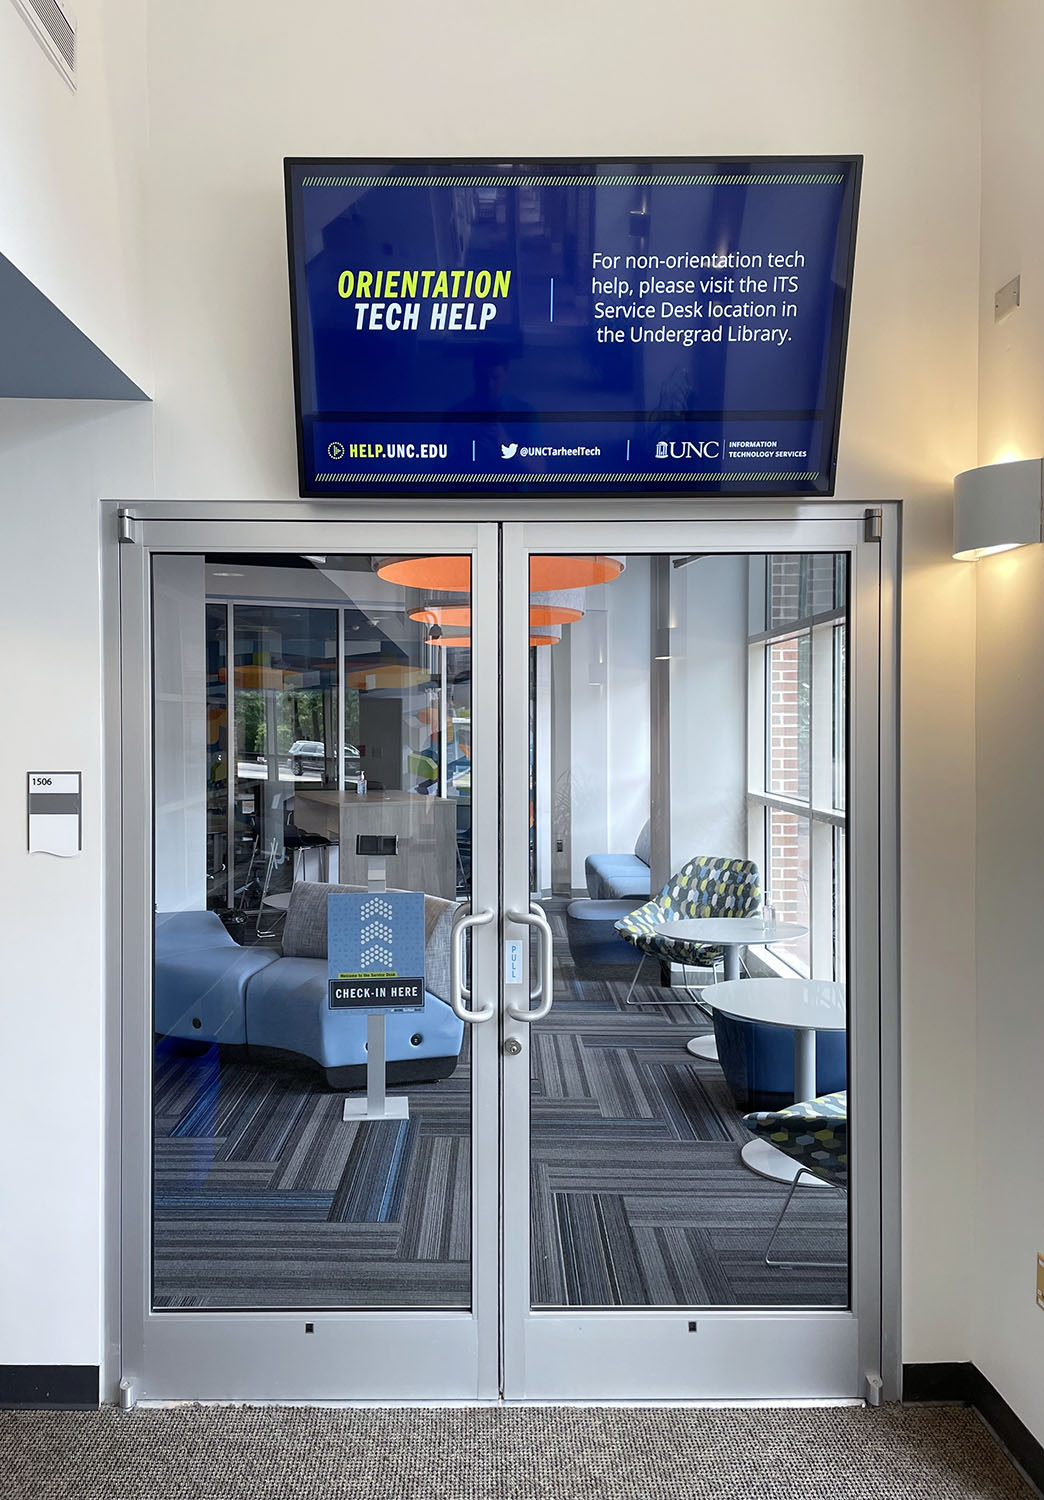 A glimpse through the glass doors from the Union into the Service Desk space. A screen over the doors reads Orientation Tech Help